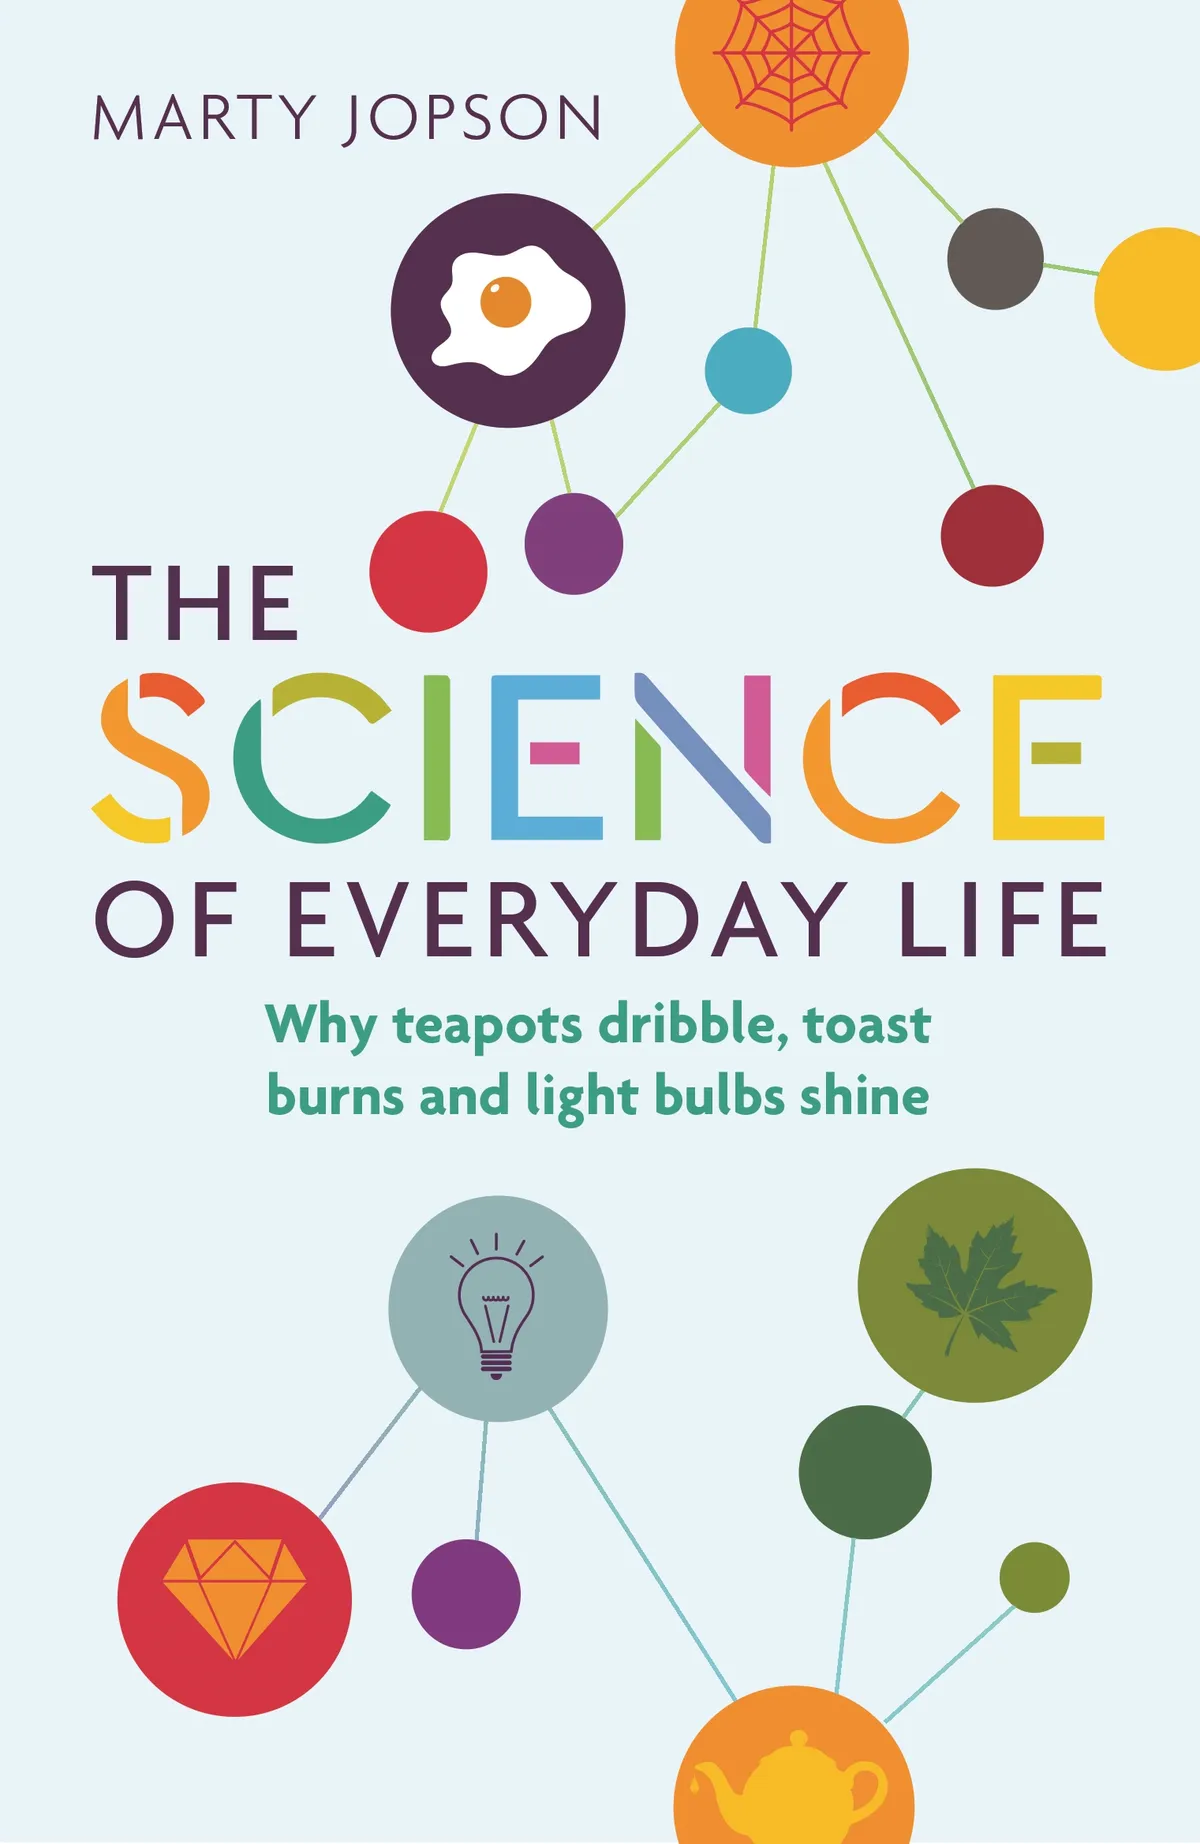 The Science of Everyday Life: Why Teapots Dribble, Toast Burns and Light Bulbs Shine by Marty Jopson is out now (£8.99, Michael O’Mara)